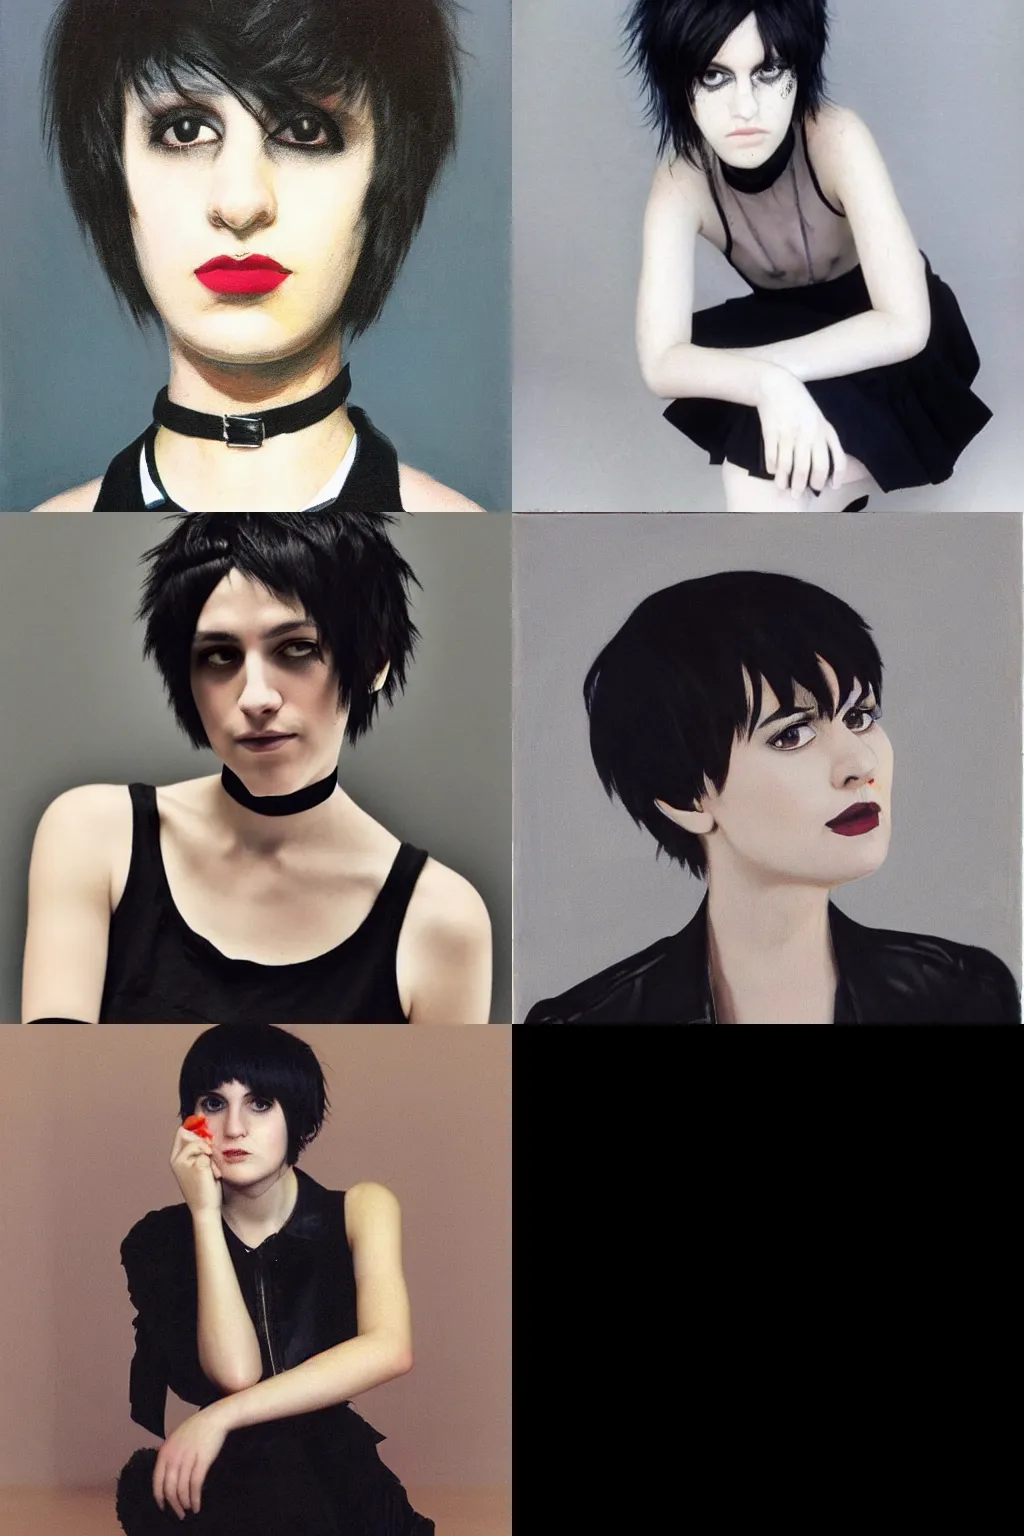 Prompt: an emo portrait by yaacov agam. her hair is dark brown and cut into a short, messy pixie cut. she has a slightly rounded face, with a pointed chin, large entirely - black eyes, and a small nose. she is wearing a black tank top, a black leather jacket, a black knee - length skirt, and a black choker..